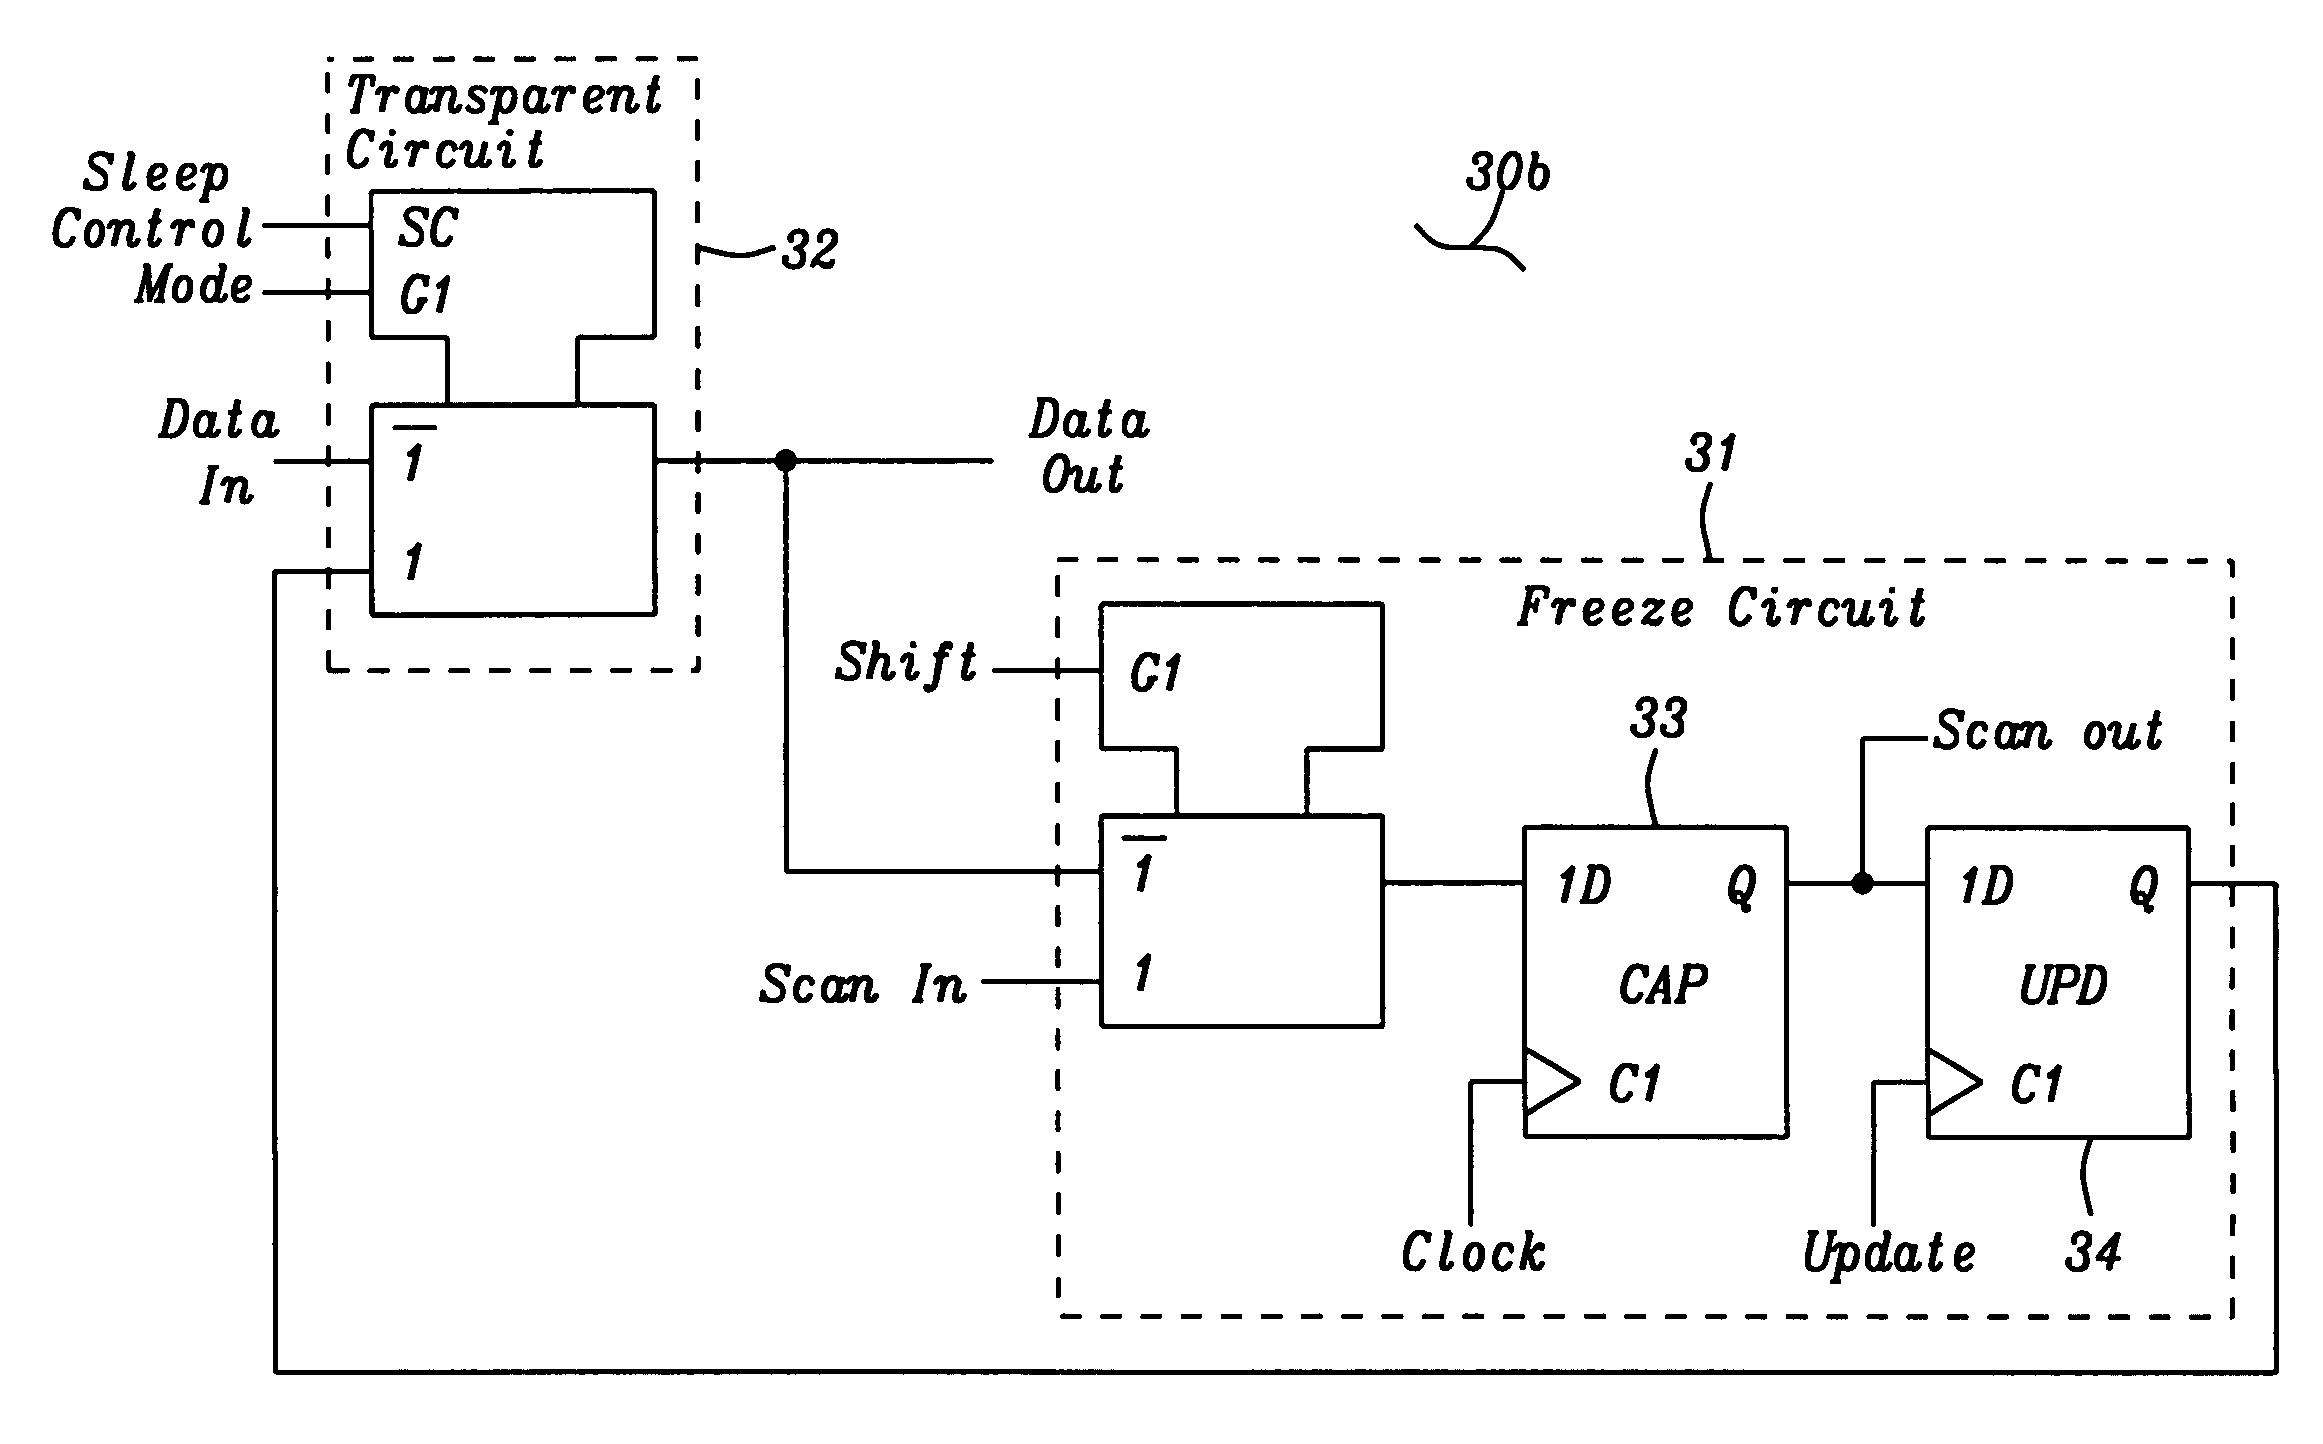 Low leakage boundary scan device design and implementation